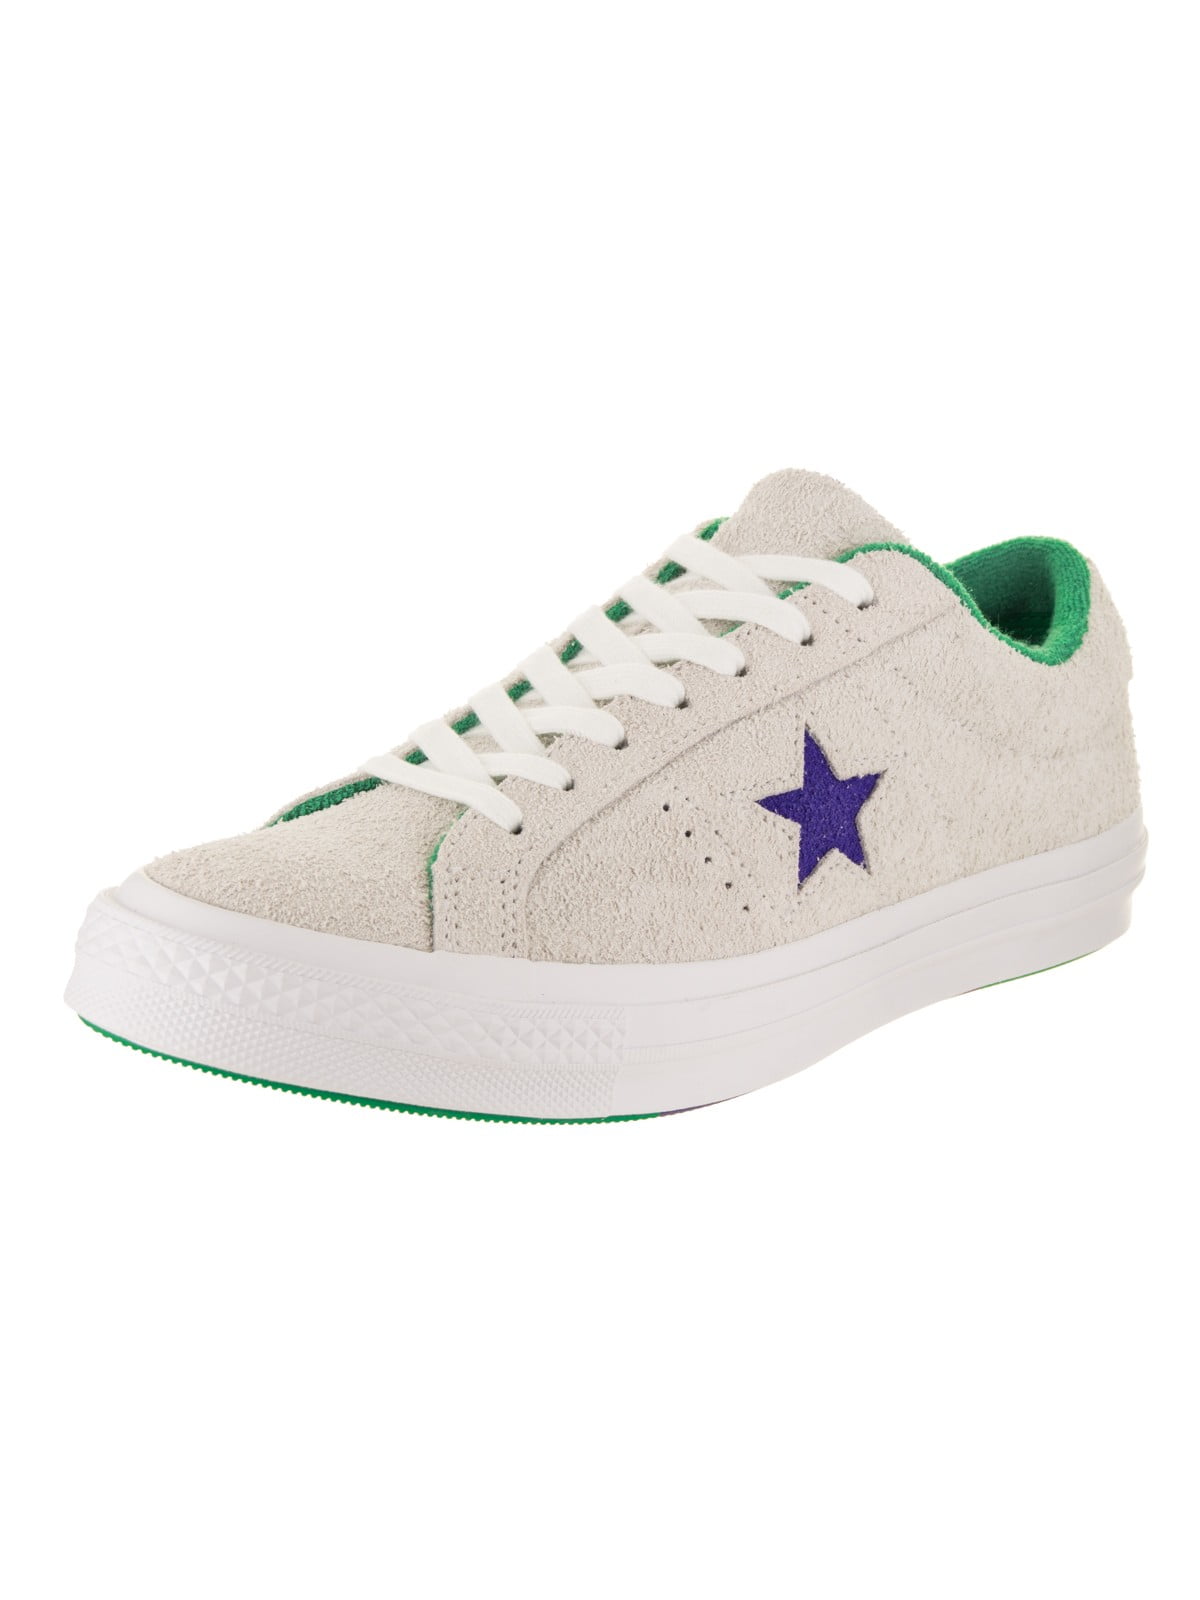 converse one star ox sneakers